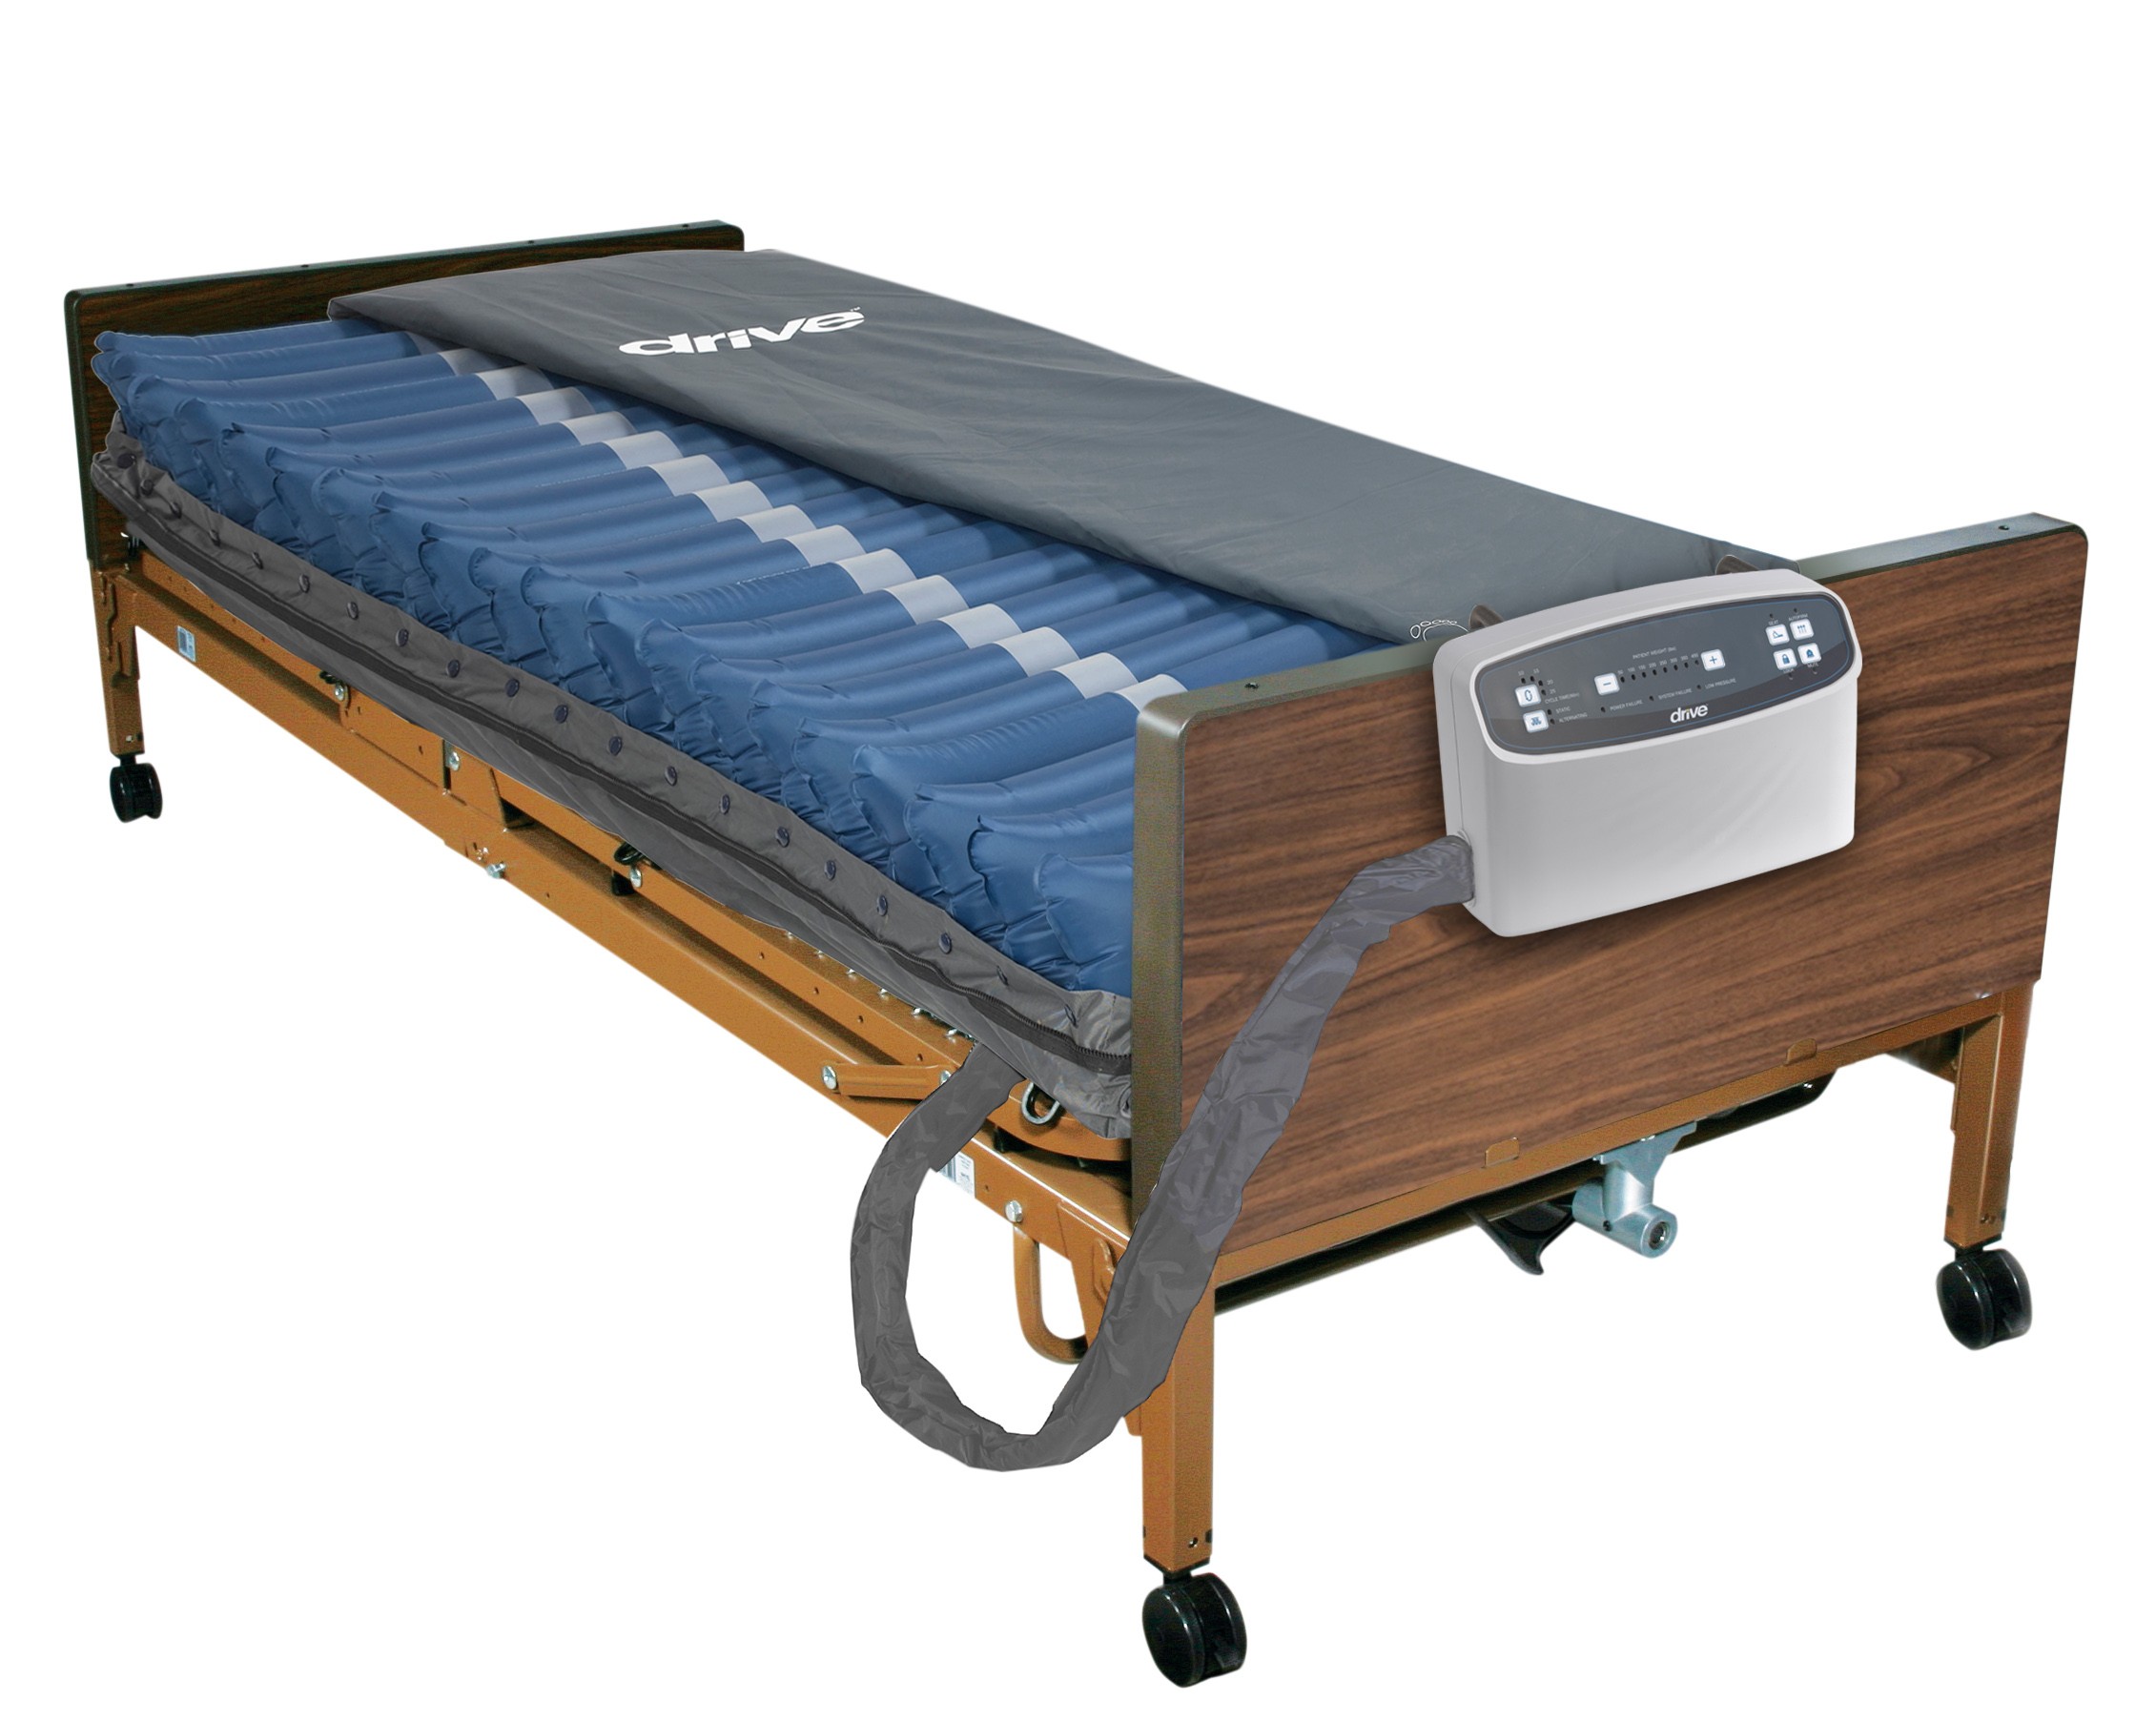 Med-Aire Plus 8" Alternating Pressure And Low Air Loss Mattress System is in stock and available at On The Mend Medical Supply & Equipment